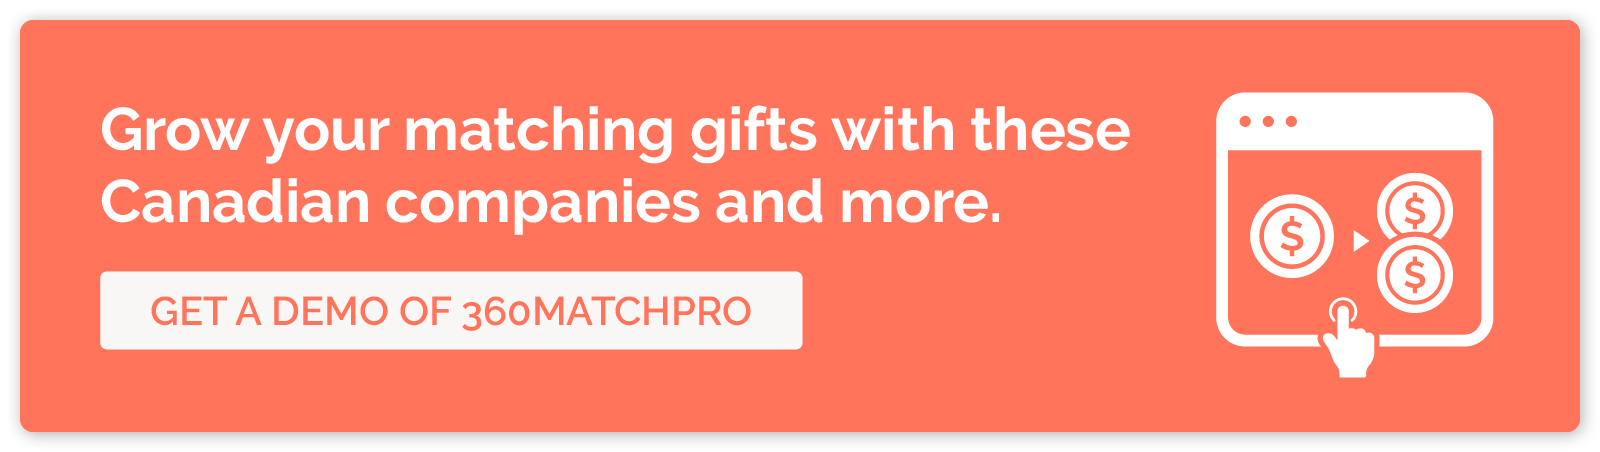 Managing Canadian companies that match gifts with Double the Donation - CTA